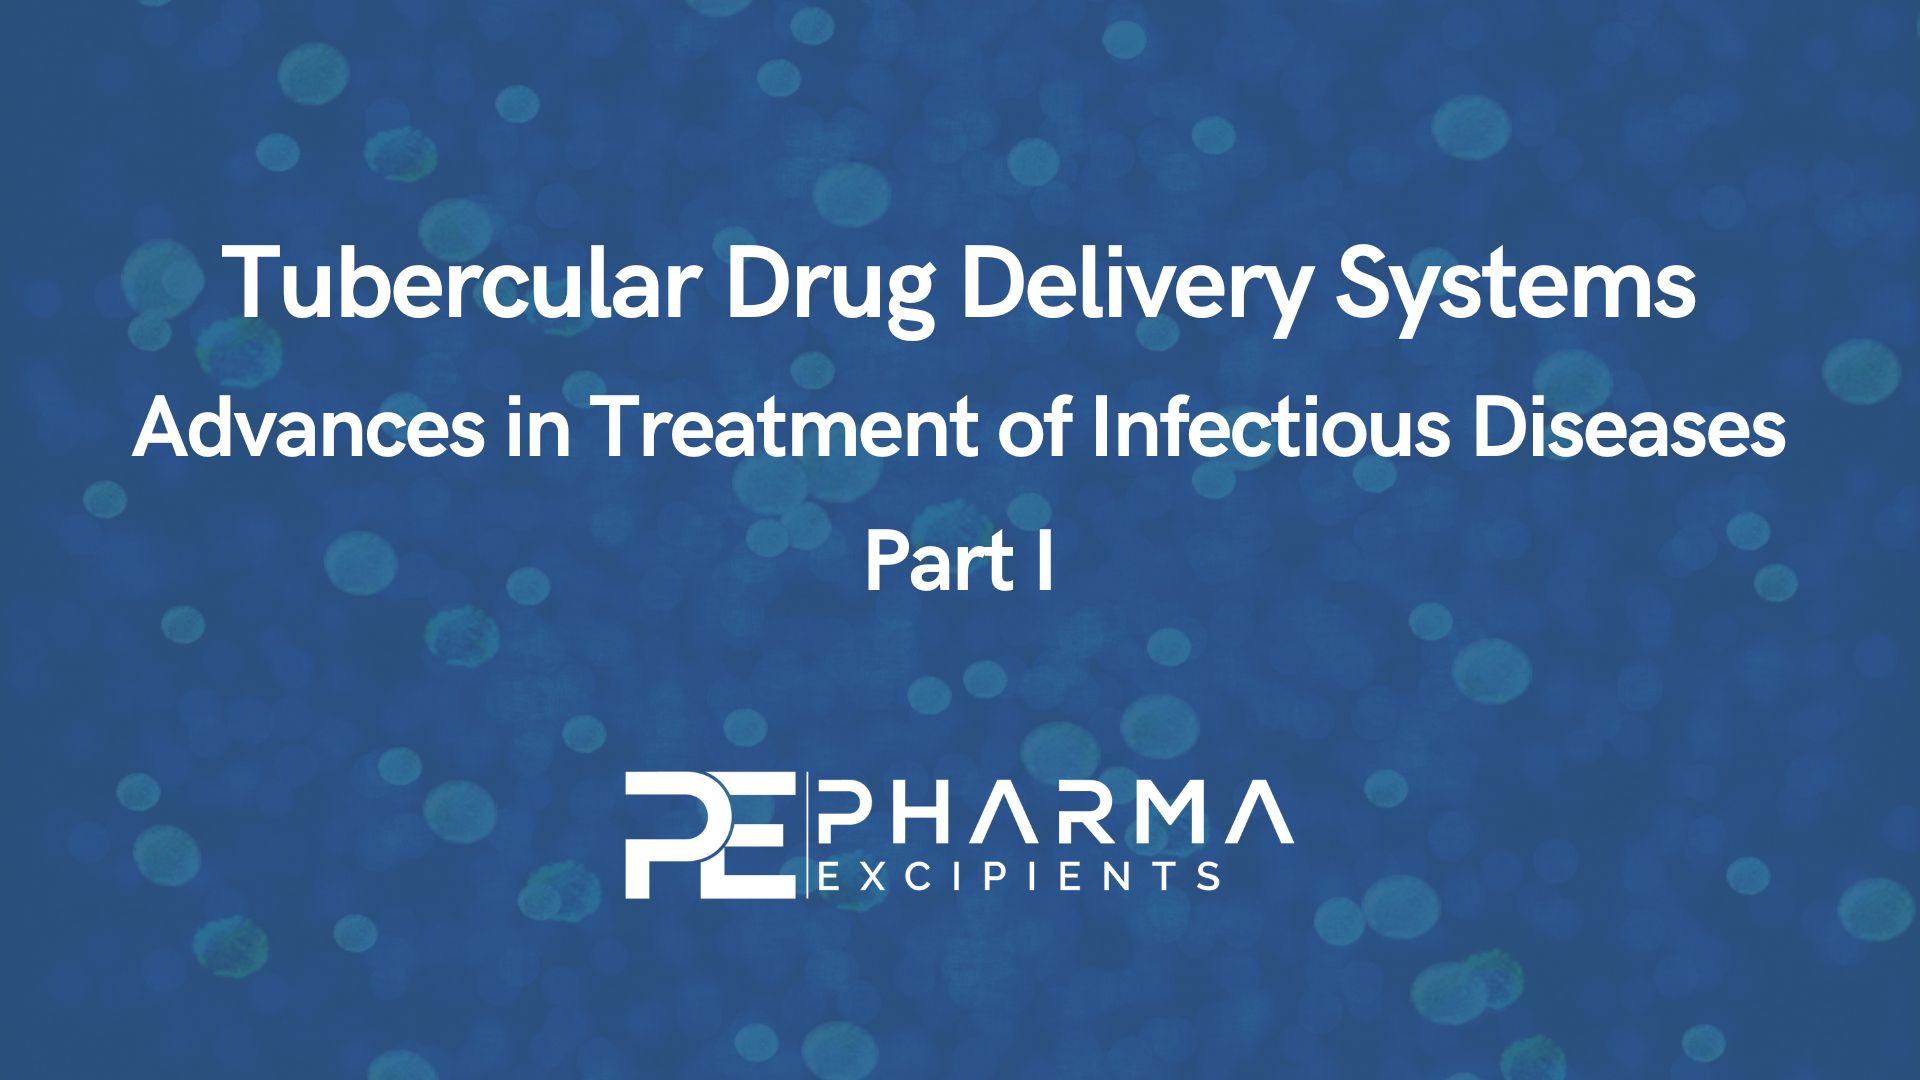 Tubercular Drug Delivery Systems - Advances in Treatment of Infectious Diseases